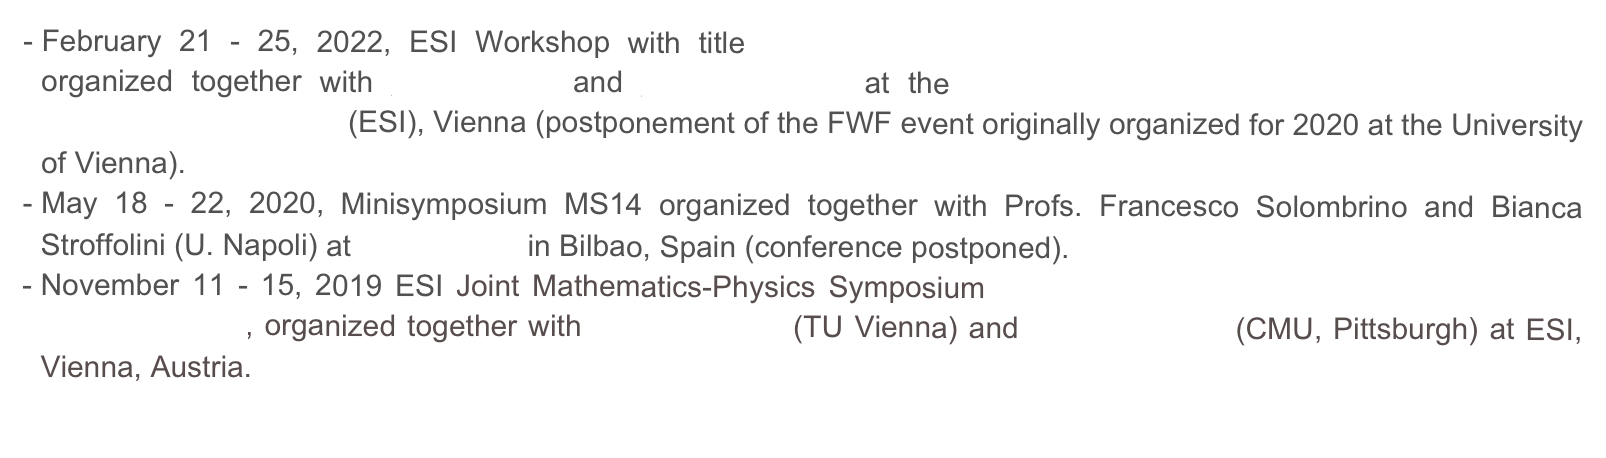 February 21 - 25, 2022, ESI Workshop with title Free Boundary Problems and related Evolution Equations organized together with G. Bellettini and Sh. Kholmatov at the Erwin Schrödinger International Institute for Mathematical  Physics (ESI), Vienna (postponement of the FWF event originally organized for 2020 at the University of Vienna).   
May 18 - 22, 2020, Minisymposium MS14 organized together with Profs. Francesco Solombrino and Bianca Stroffolini (U. Napoli) at SIAM MS20 in Bilbao, Spain (conference postponed).
November 11 - 15, 2019 ESI Joint Mathematics-Physics Symposium Modeling of crystalline Interfaces and Thin Film Structures, organized together with Ulrike Diebold (TU Vienna) and Irene Fonseca (CMU, Pittsburgh) at ESI, Vienna, Austria. 
